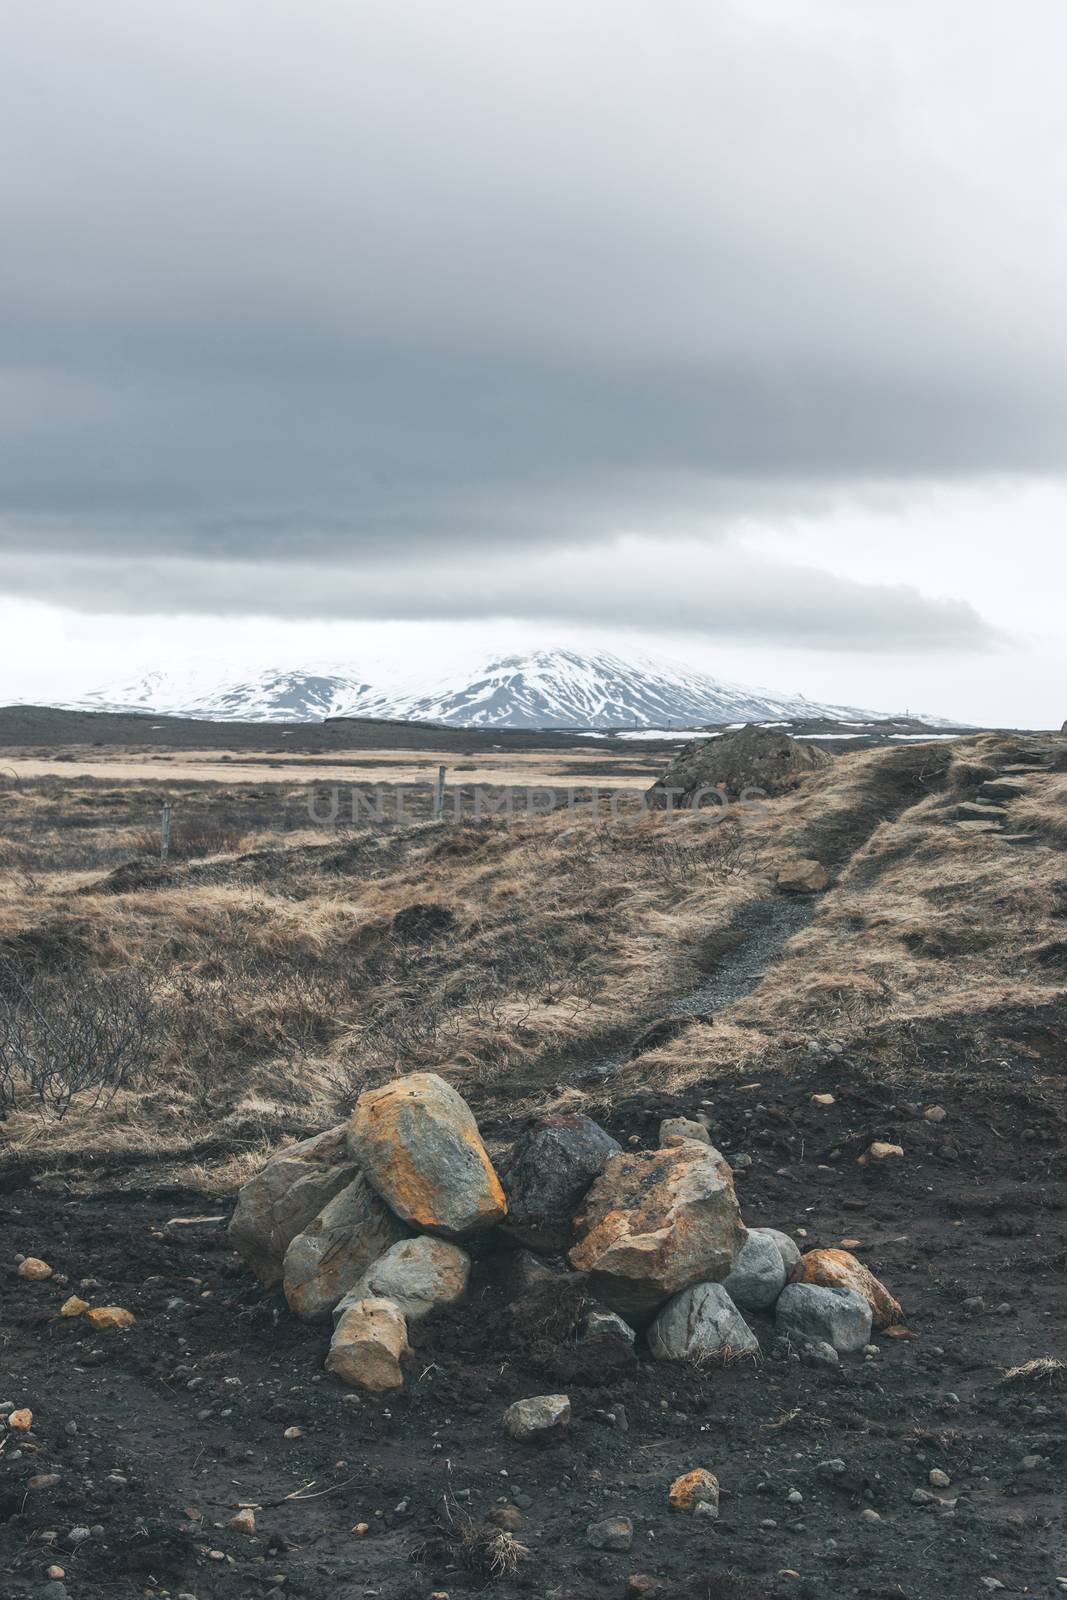 Cloudy weather over a rocky landscape in Iceland